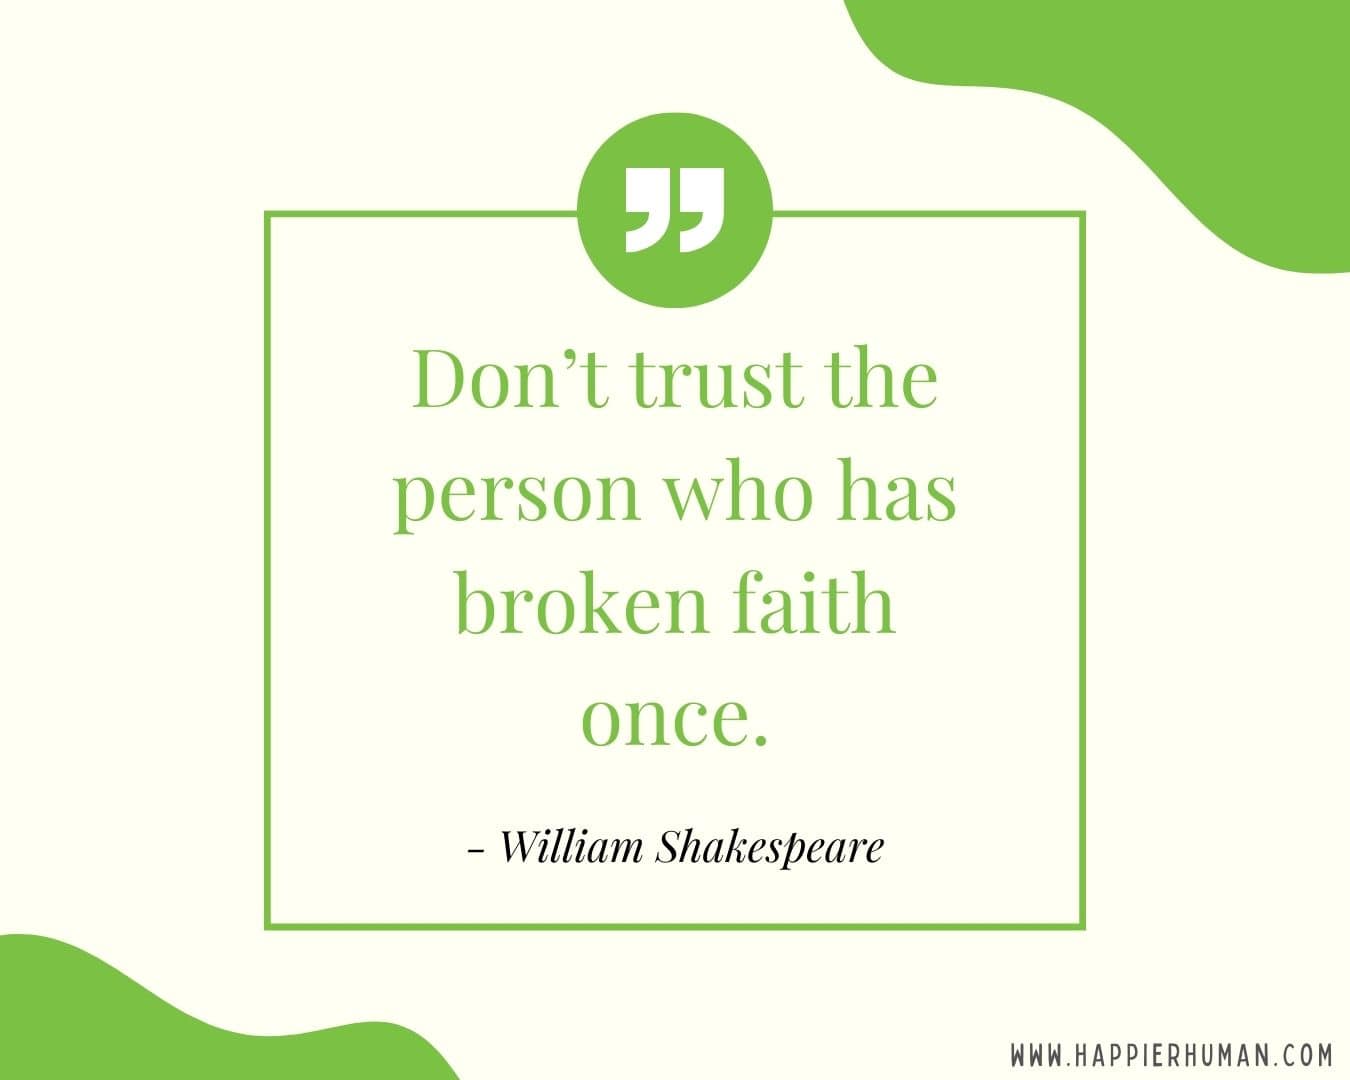 Broken Trust Quotes - “Don’t trust the person who has broken faith once.” - William Shakespeare